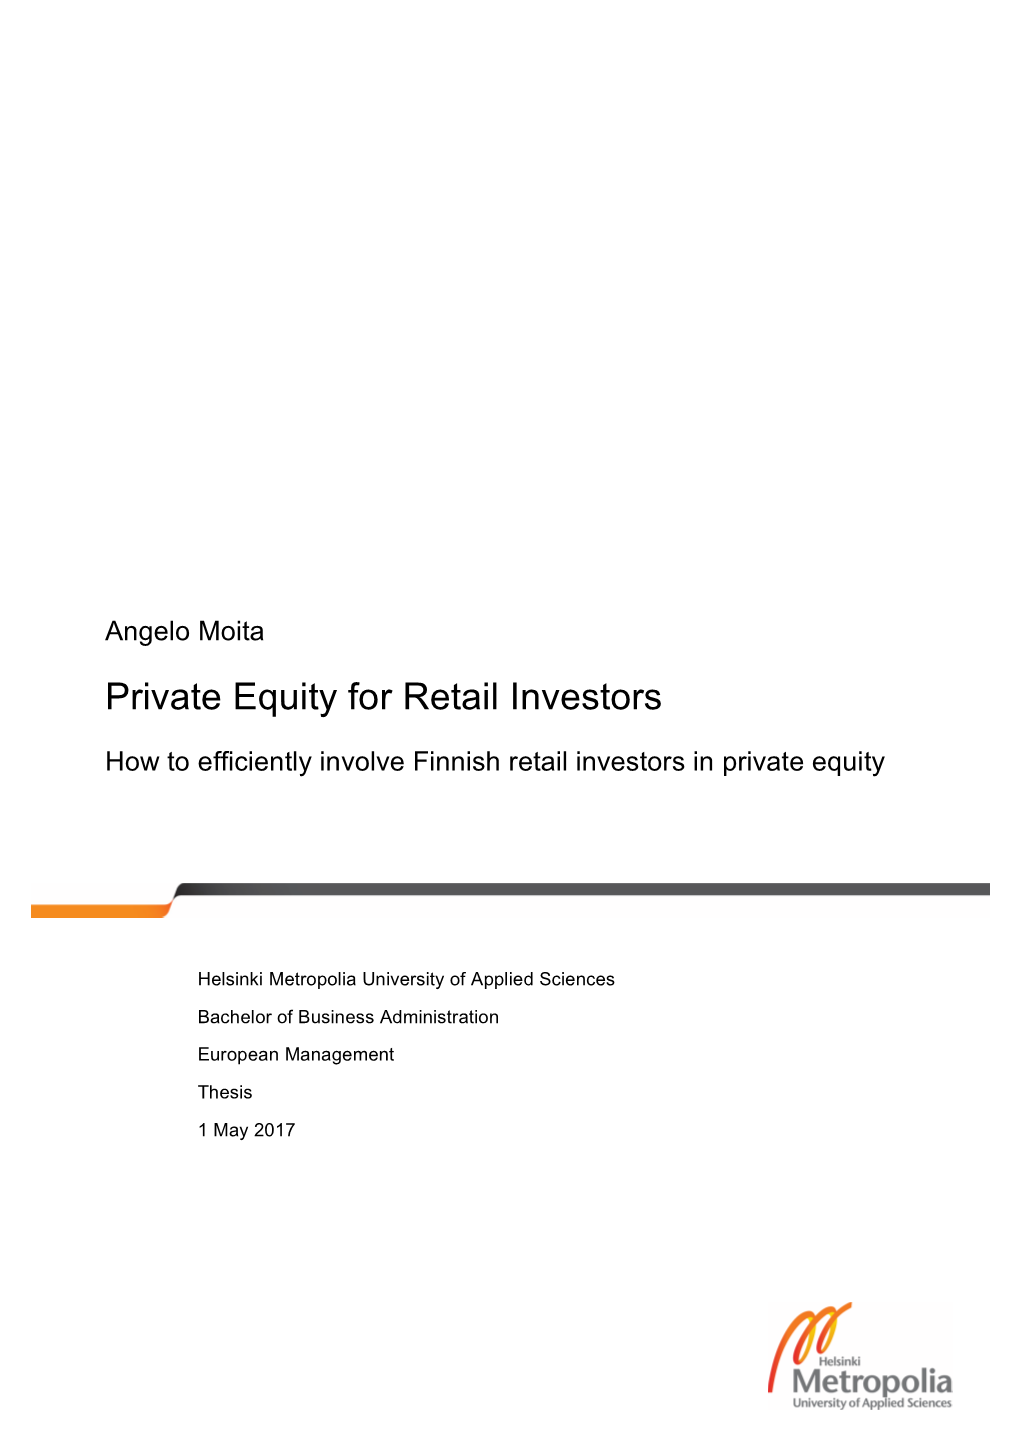 Private Equity for Retail Investors